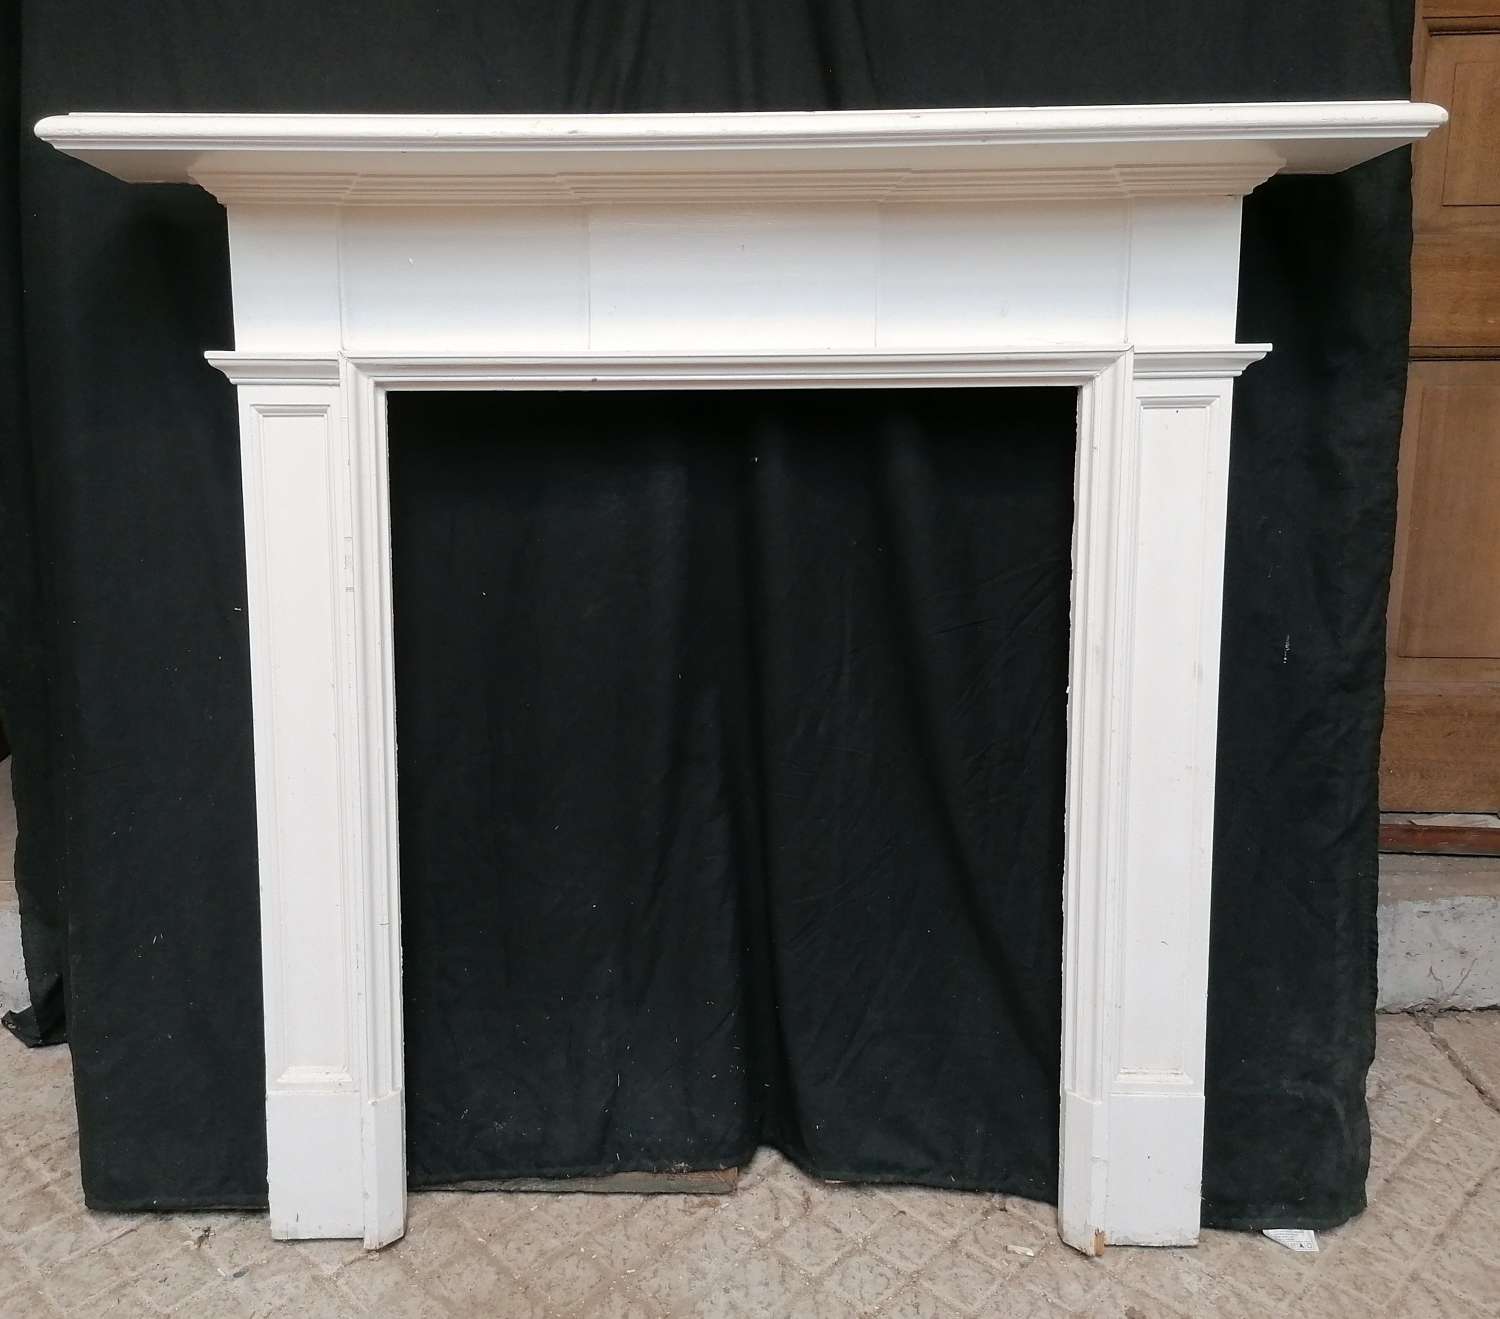 FS0153 AN ANTIQUE RECLAIMED PAINTED PINE VICTORIAN FIRE SURROUND